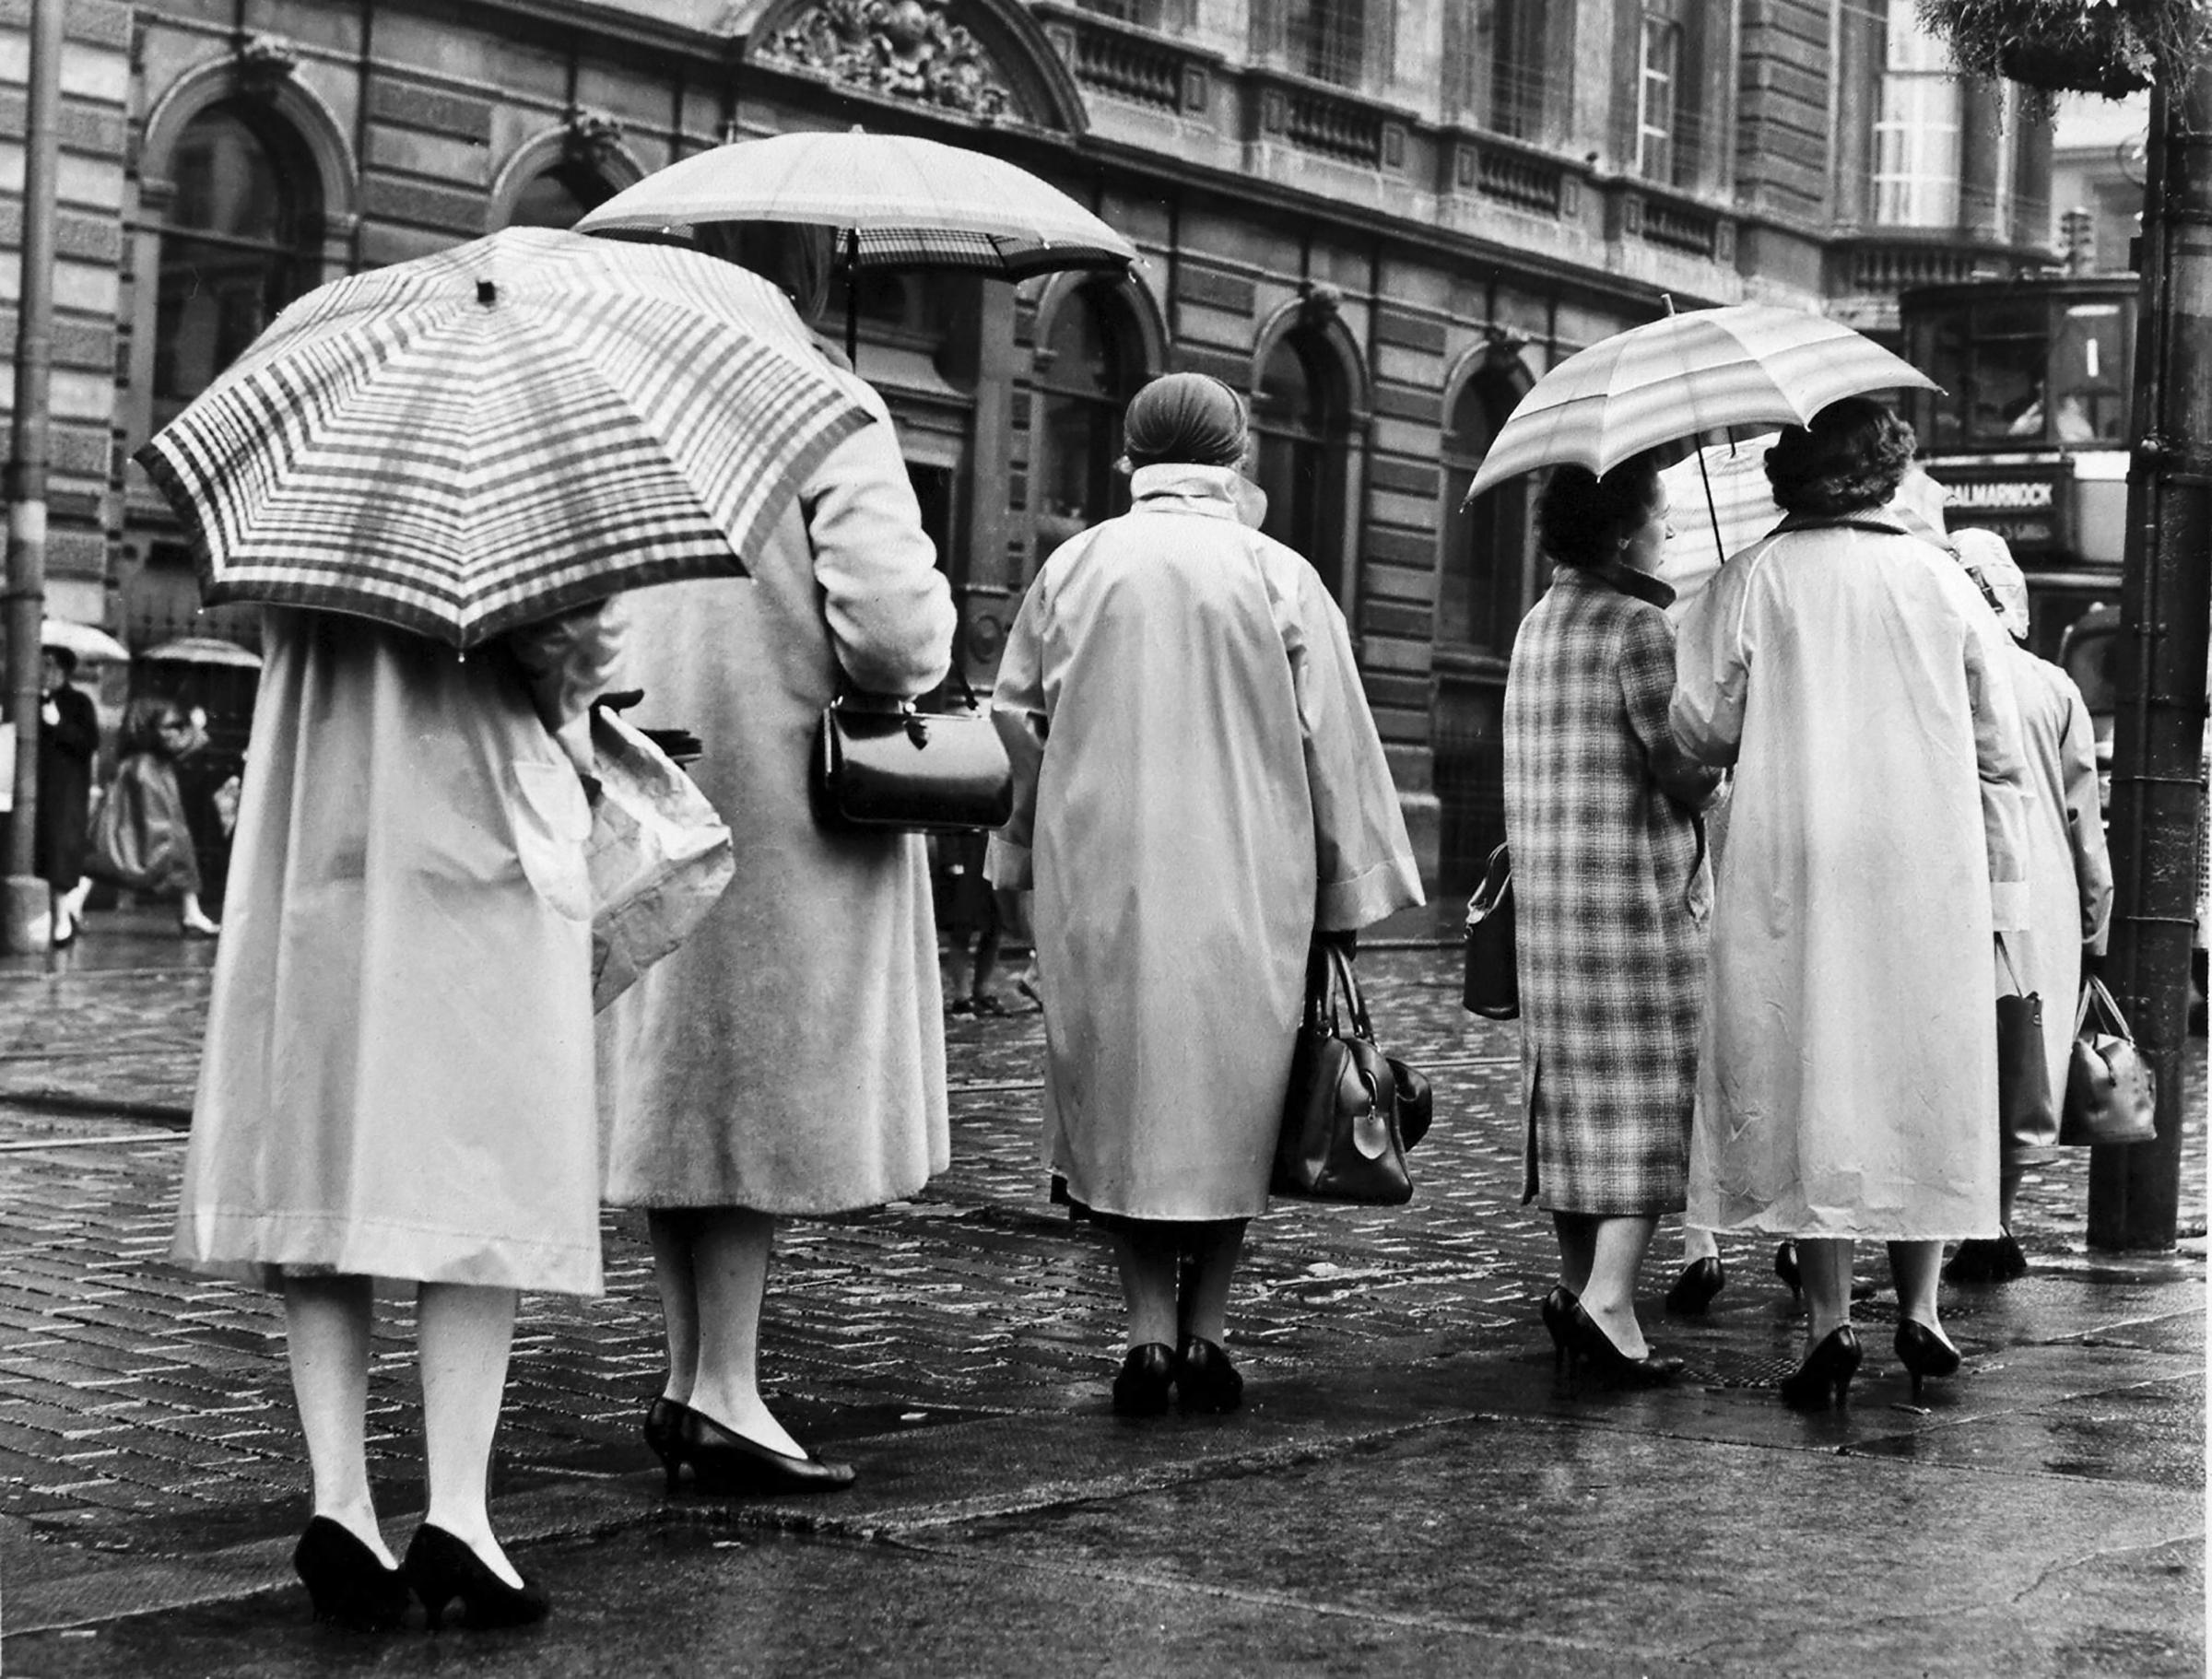 Some stylish brolly action here on a rainy Glasgow street in 1959. Pic: Herald and Times